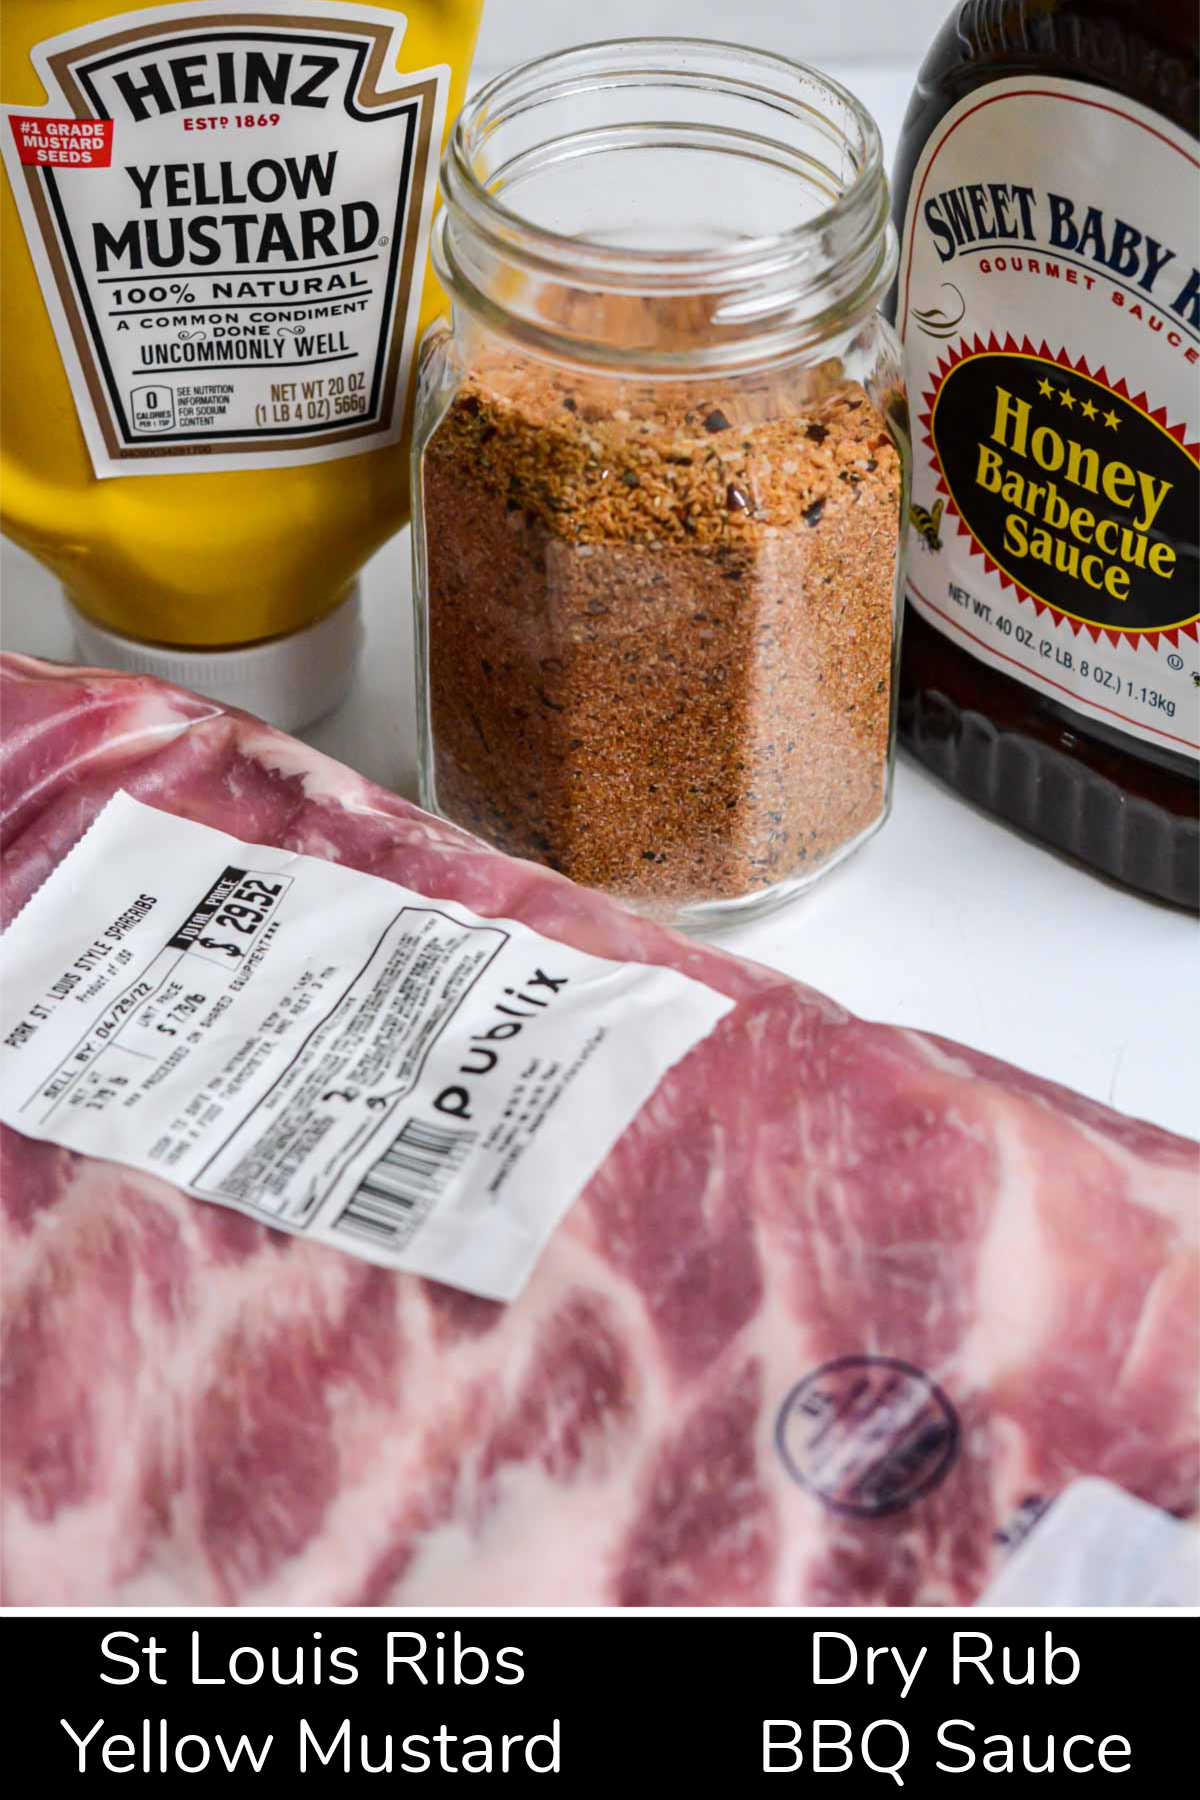 ingredient photo showing the St. Louis ribs, yellow mustard, dry rub and BBQ sauce.